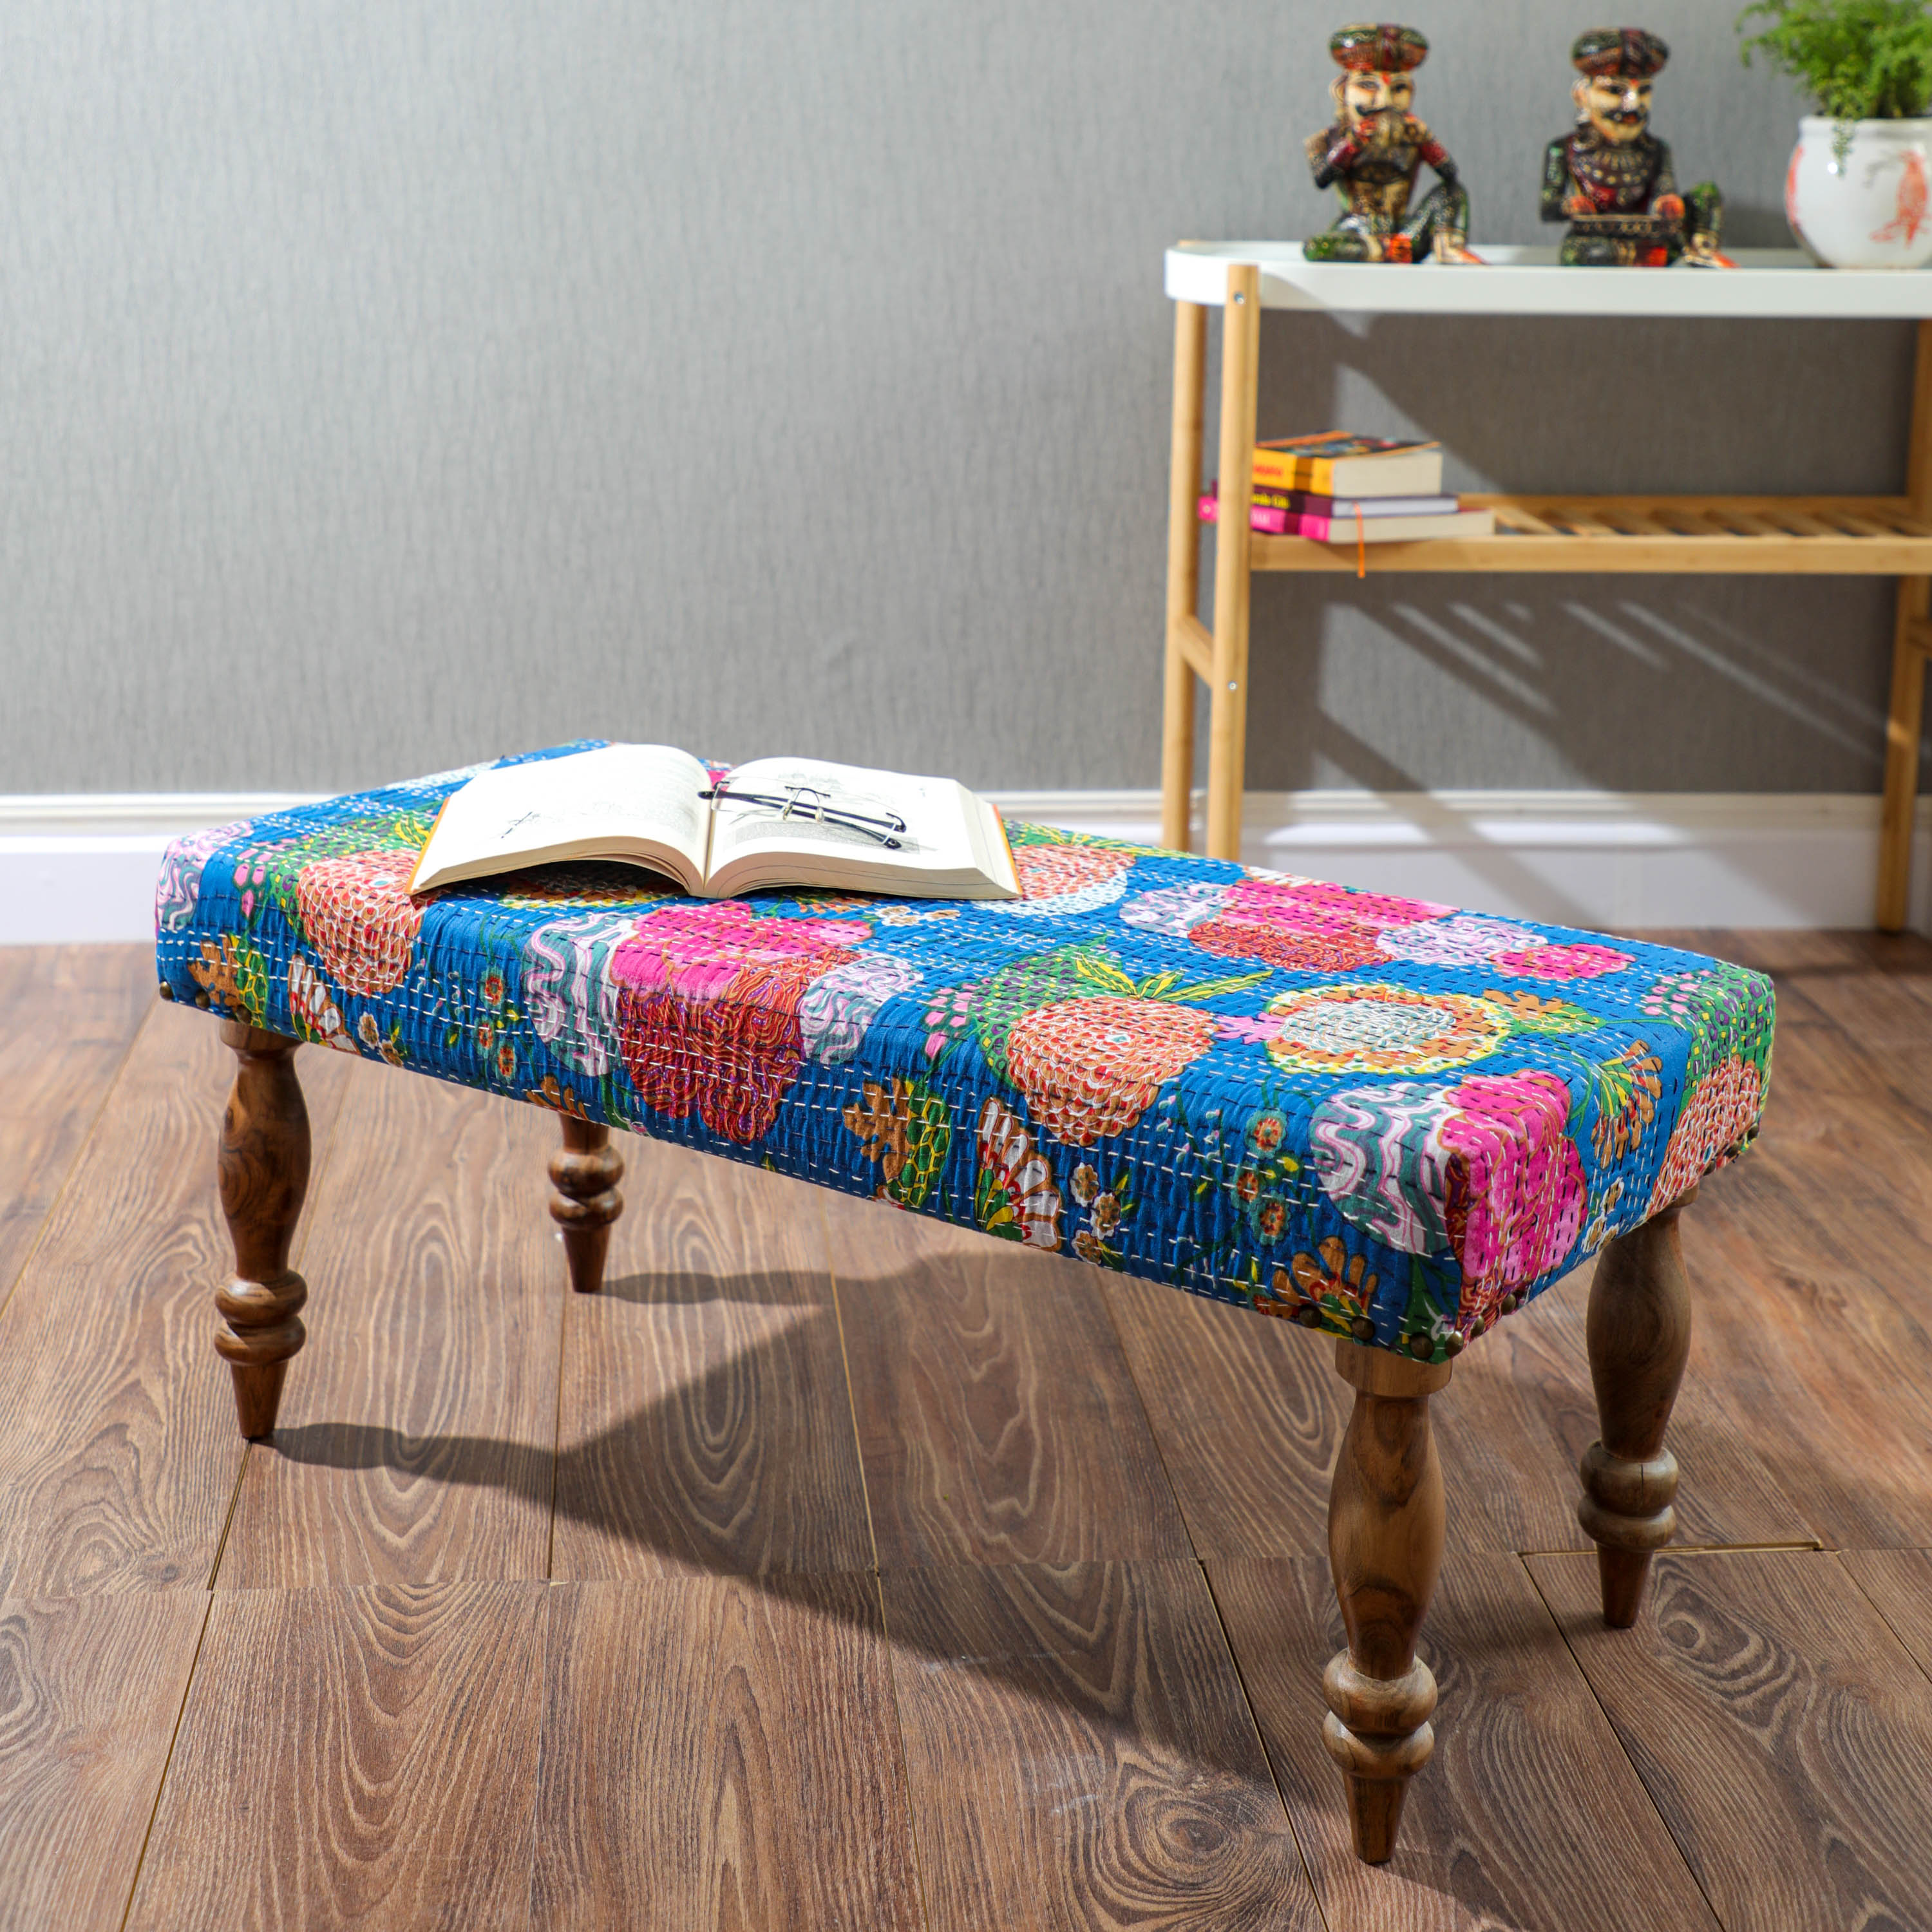 Buy Cairo Bench in Royal Blue Floral Fabric | Indian Home Decor in USA